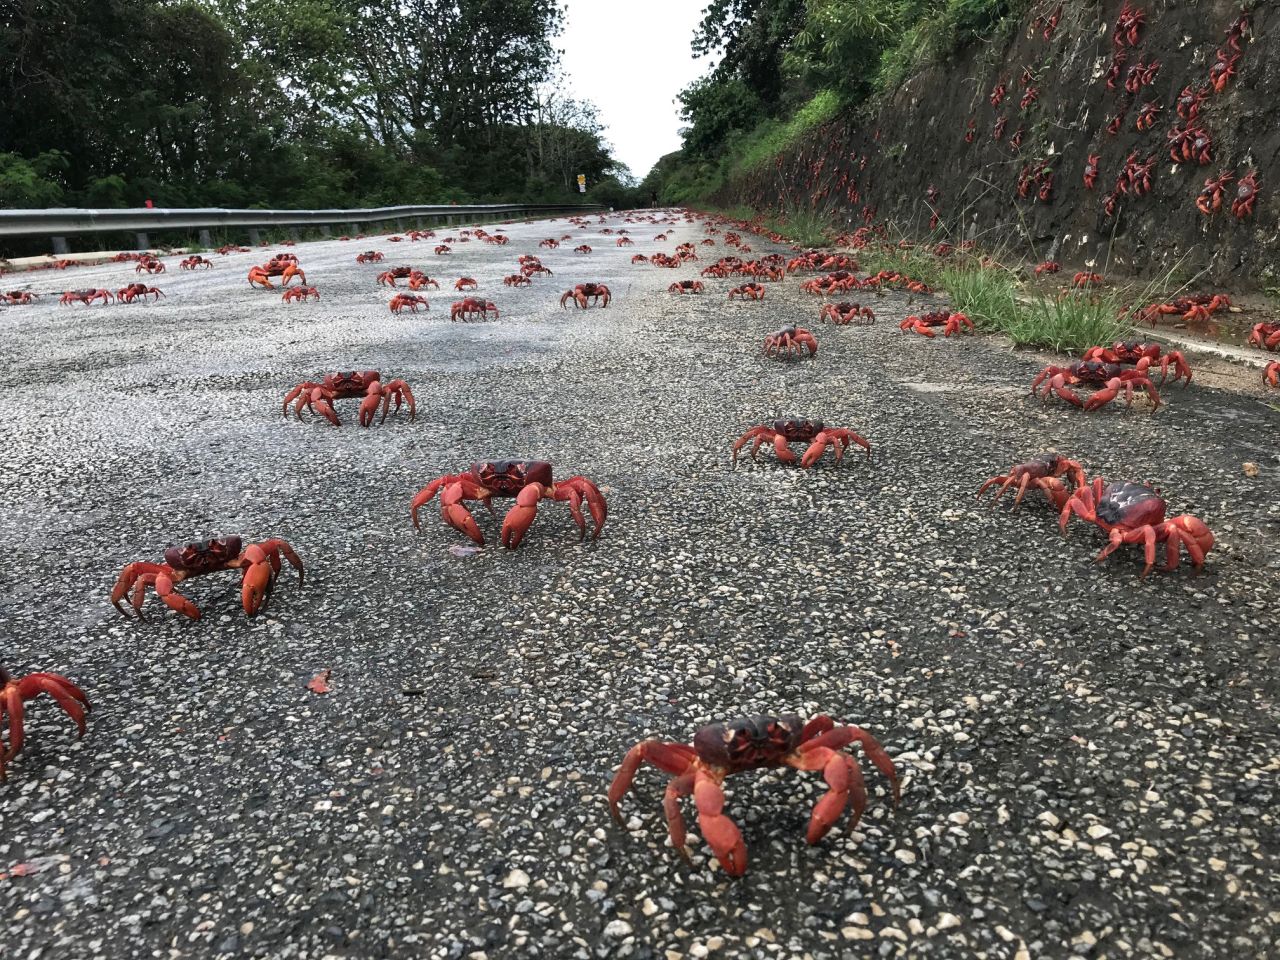 Red crabs walk on a road in Christmas Island, an Australian territory in the Indian Ocean, on Tuesday, November 23. Every year, millions of the island's red crabs <a href="https://www.cnn.com/videos/world/2021/11/18/red-crab-migration-overpass-christmas-island-australia-ctw-vpx.cnn" target="_blank">migrate to the ocean</a> during their mating season.